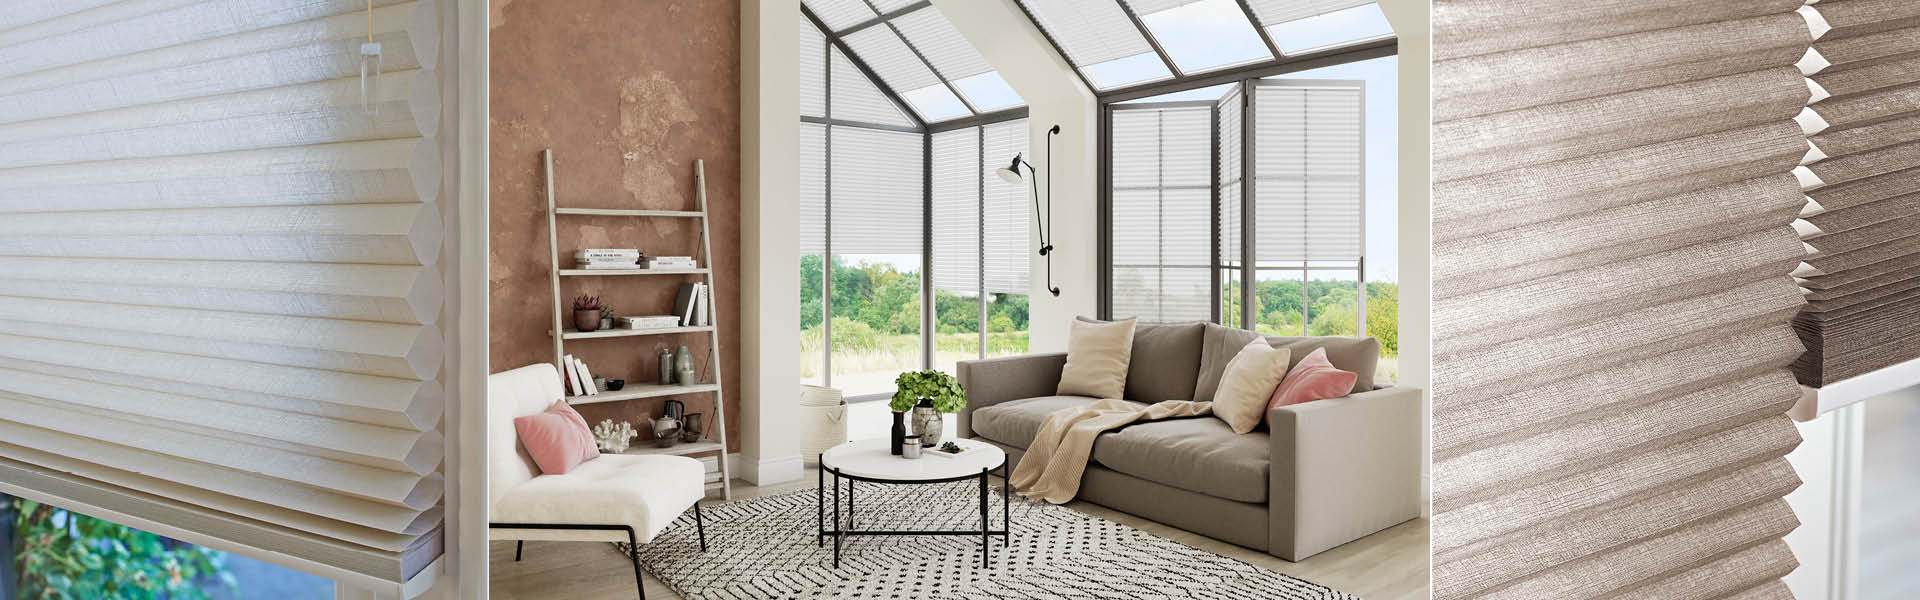 Duette Blinds from Shutterstyle